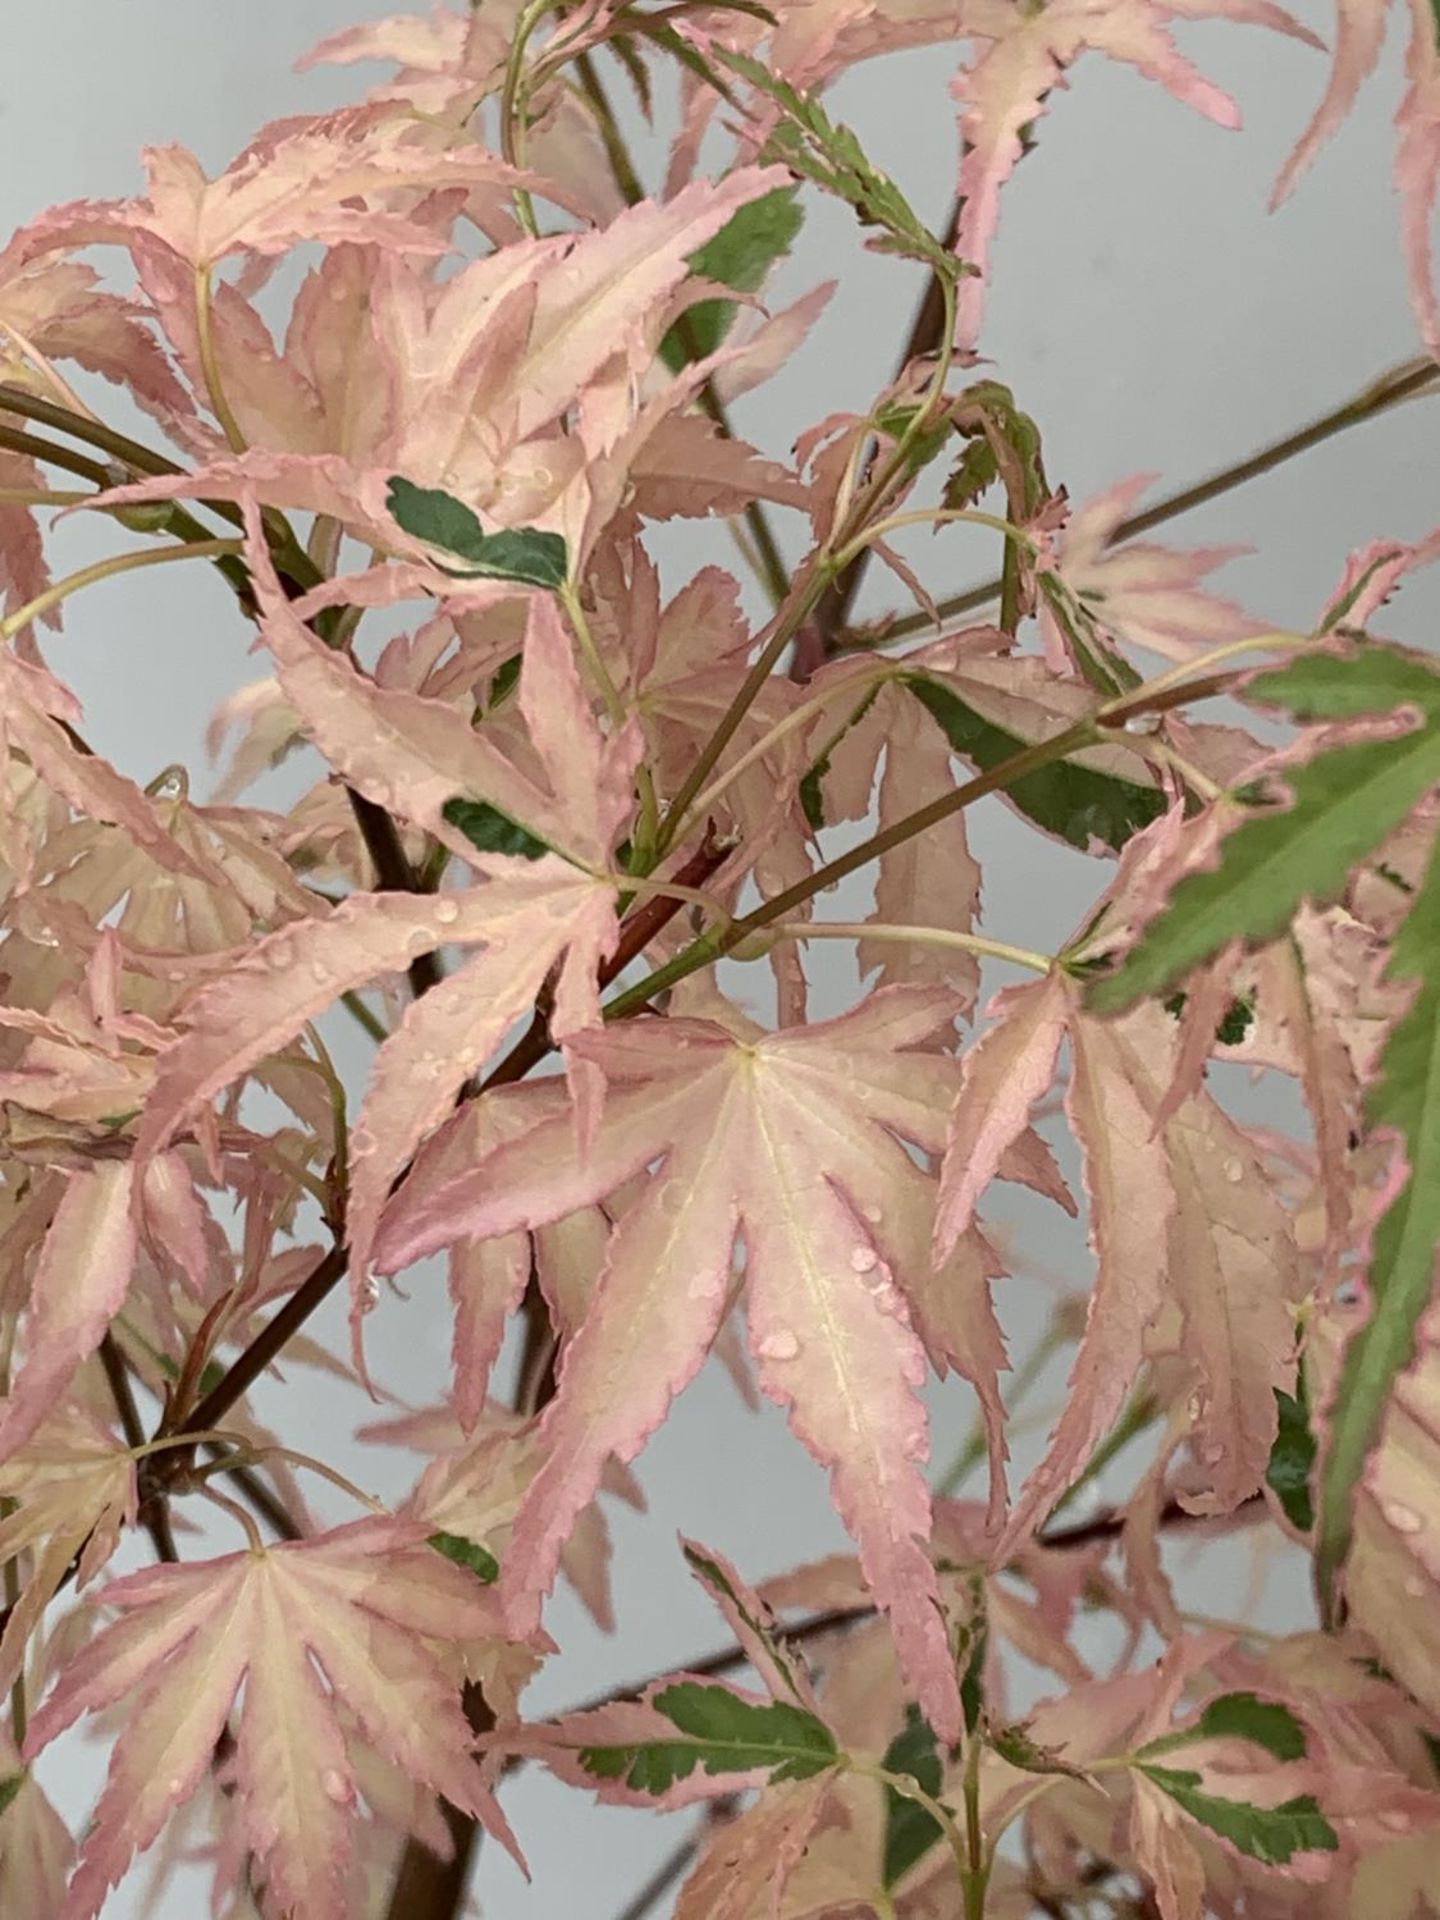 TWO ACER PALMATUM JAPANESE JEWELS TO INCLUDE TAYLOR AND SHAINIA IN 3 LTR POTS 60-70CM TALL TO BE - Image 3 of 9